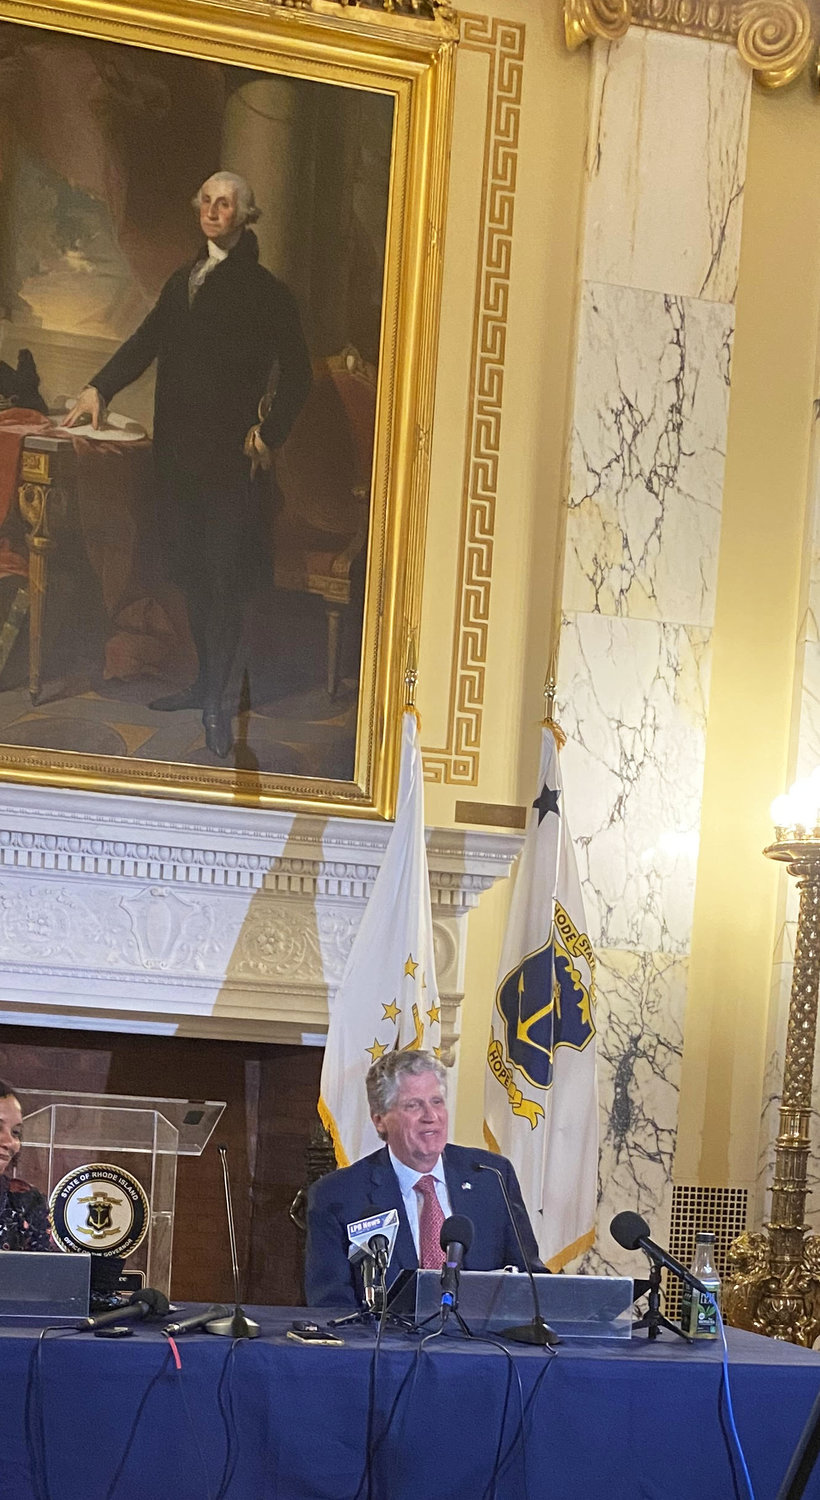 Gov. Dan McKee at a news conference at the State House, underneath the portrait of George Washington.